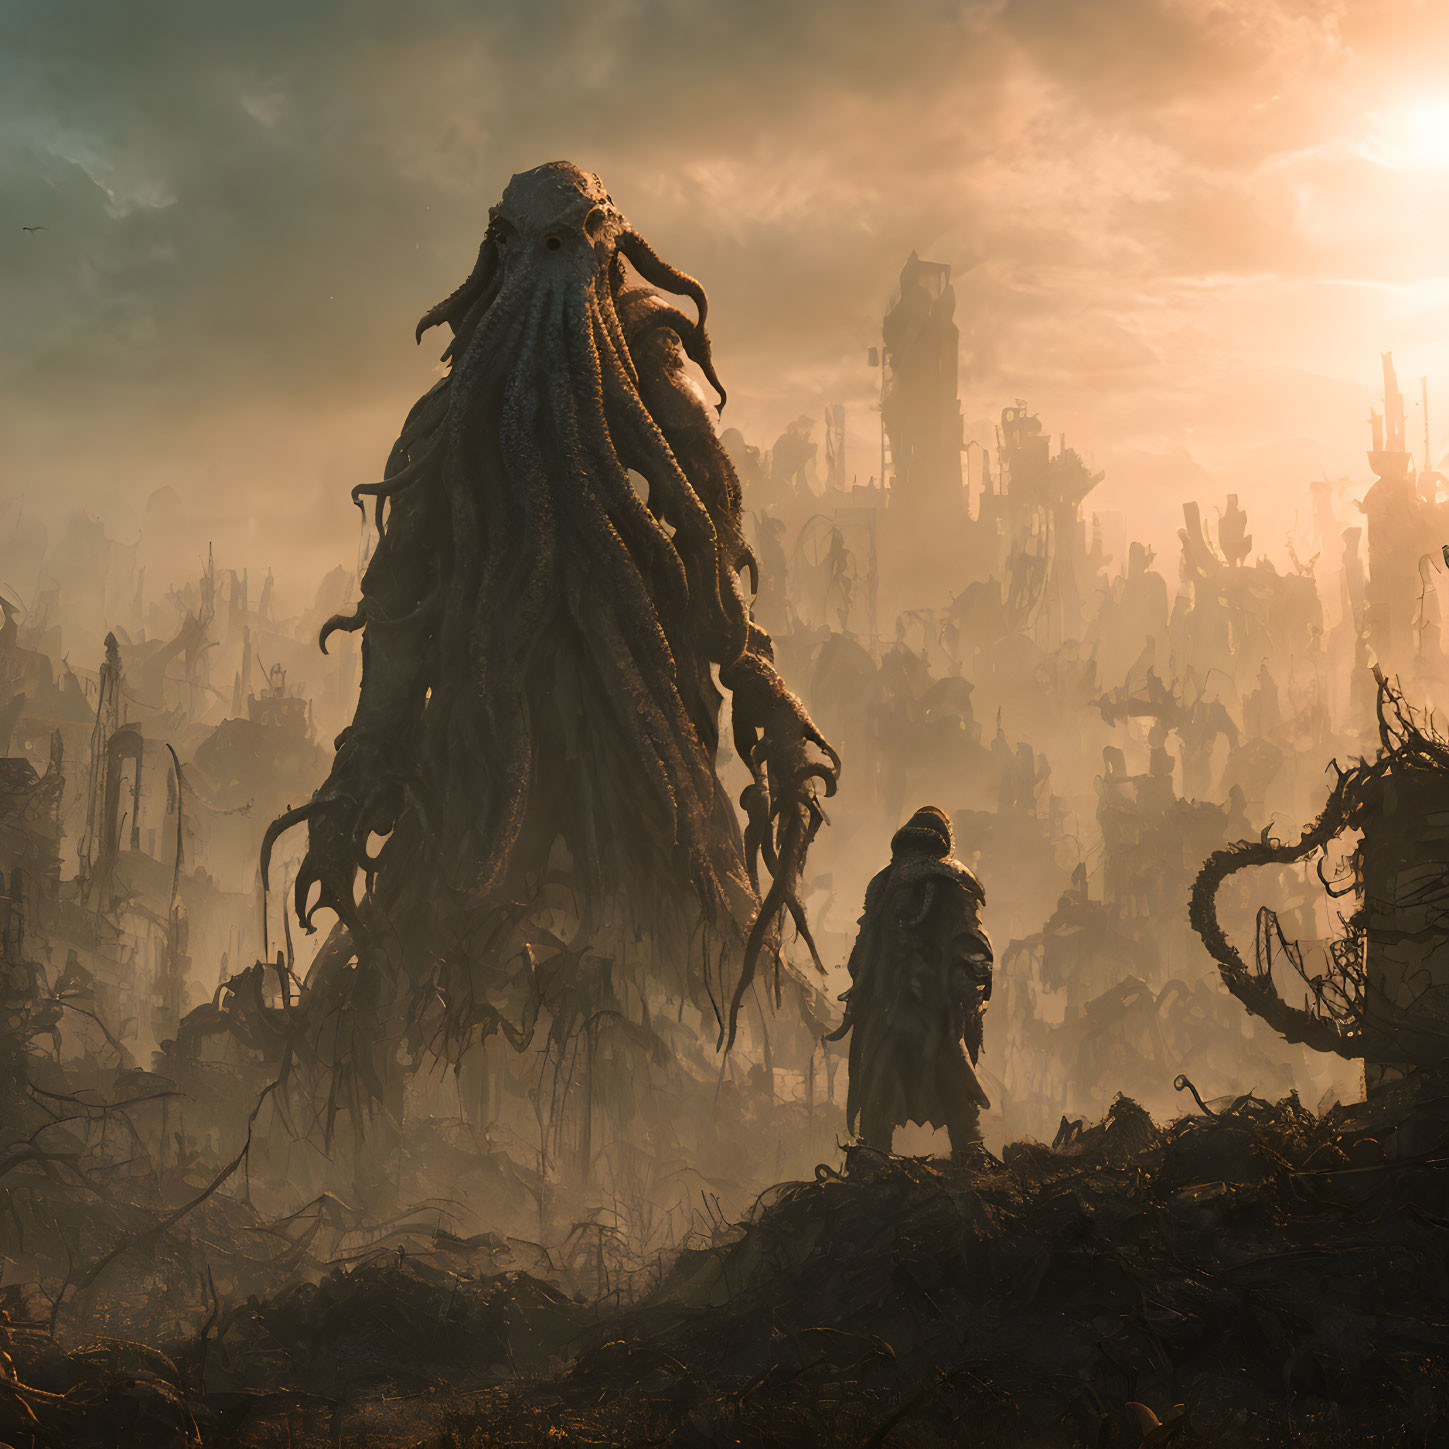 Cloaked Figure Confronts Giant Tentacled Creature in Dystopian Landscape